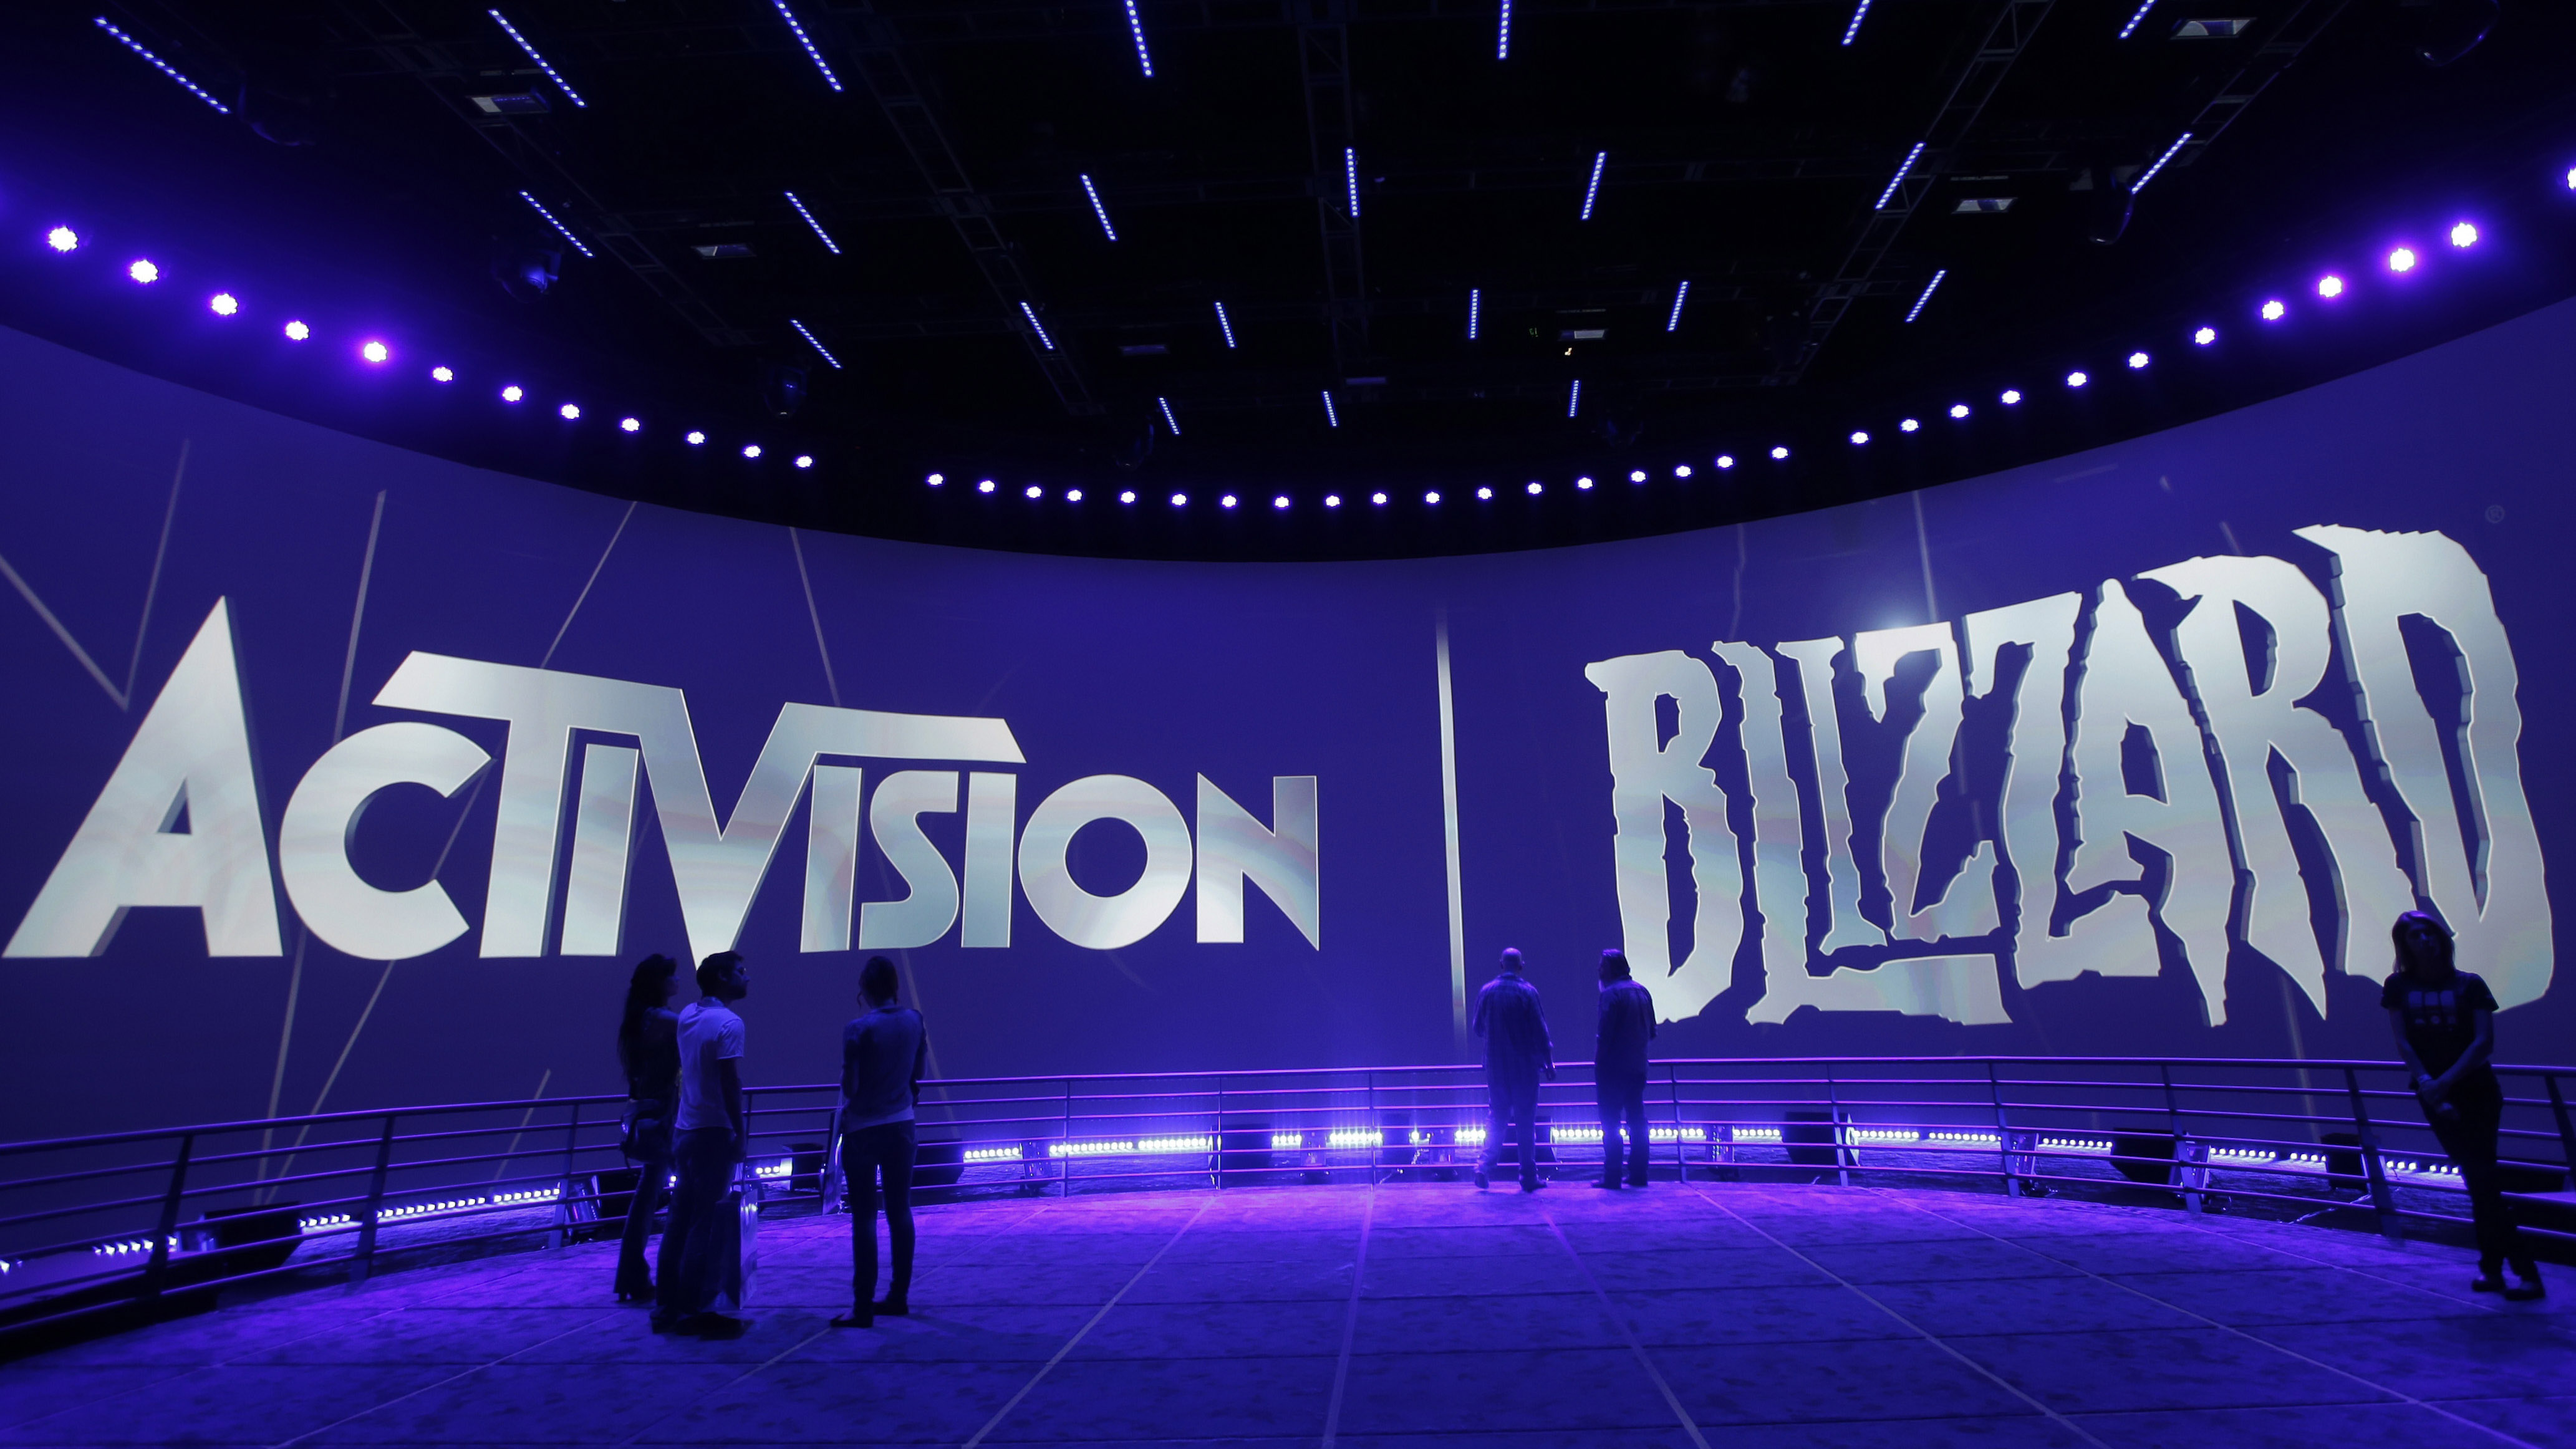 CMA Says Discussion With Microsoft About Activision Blizzard